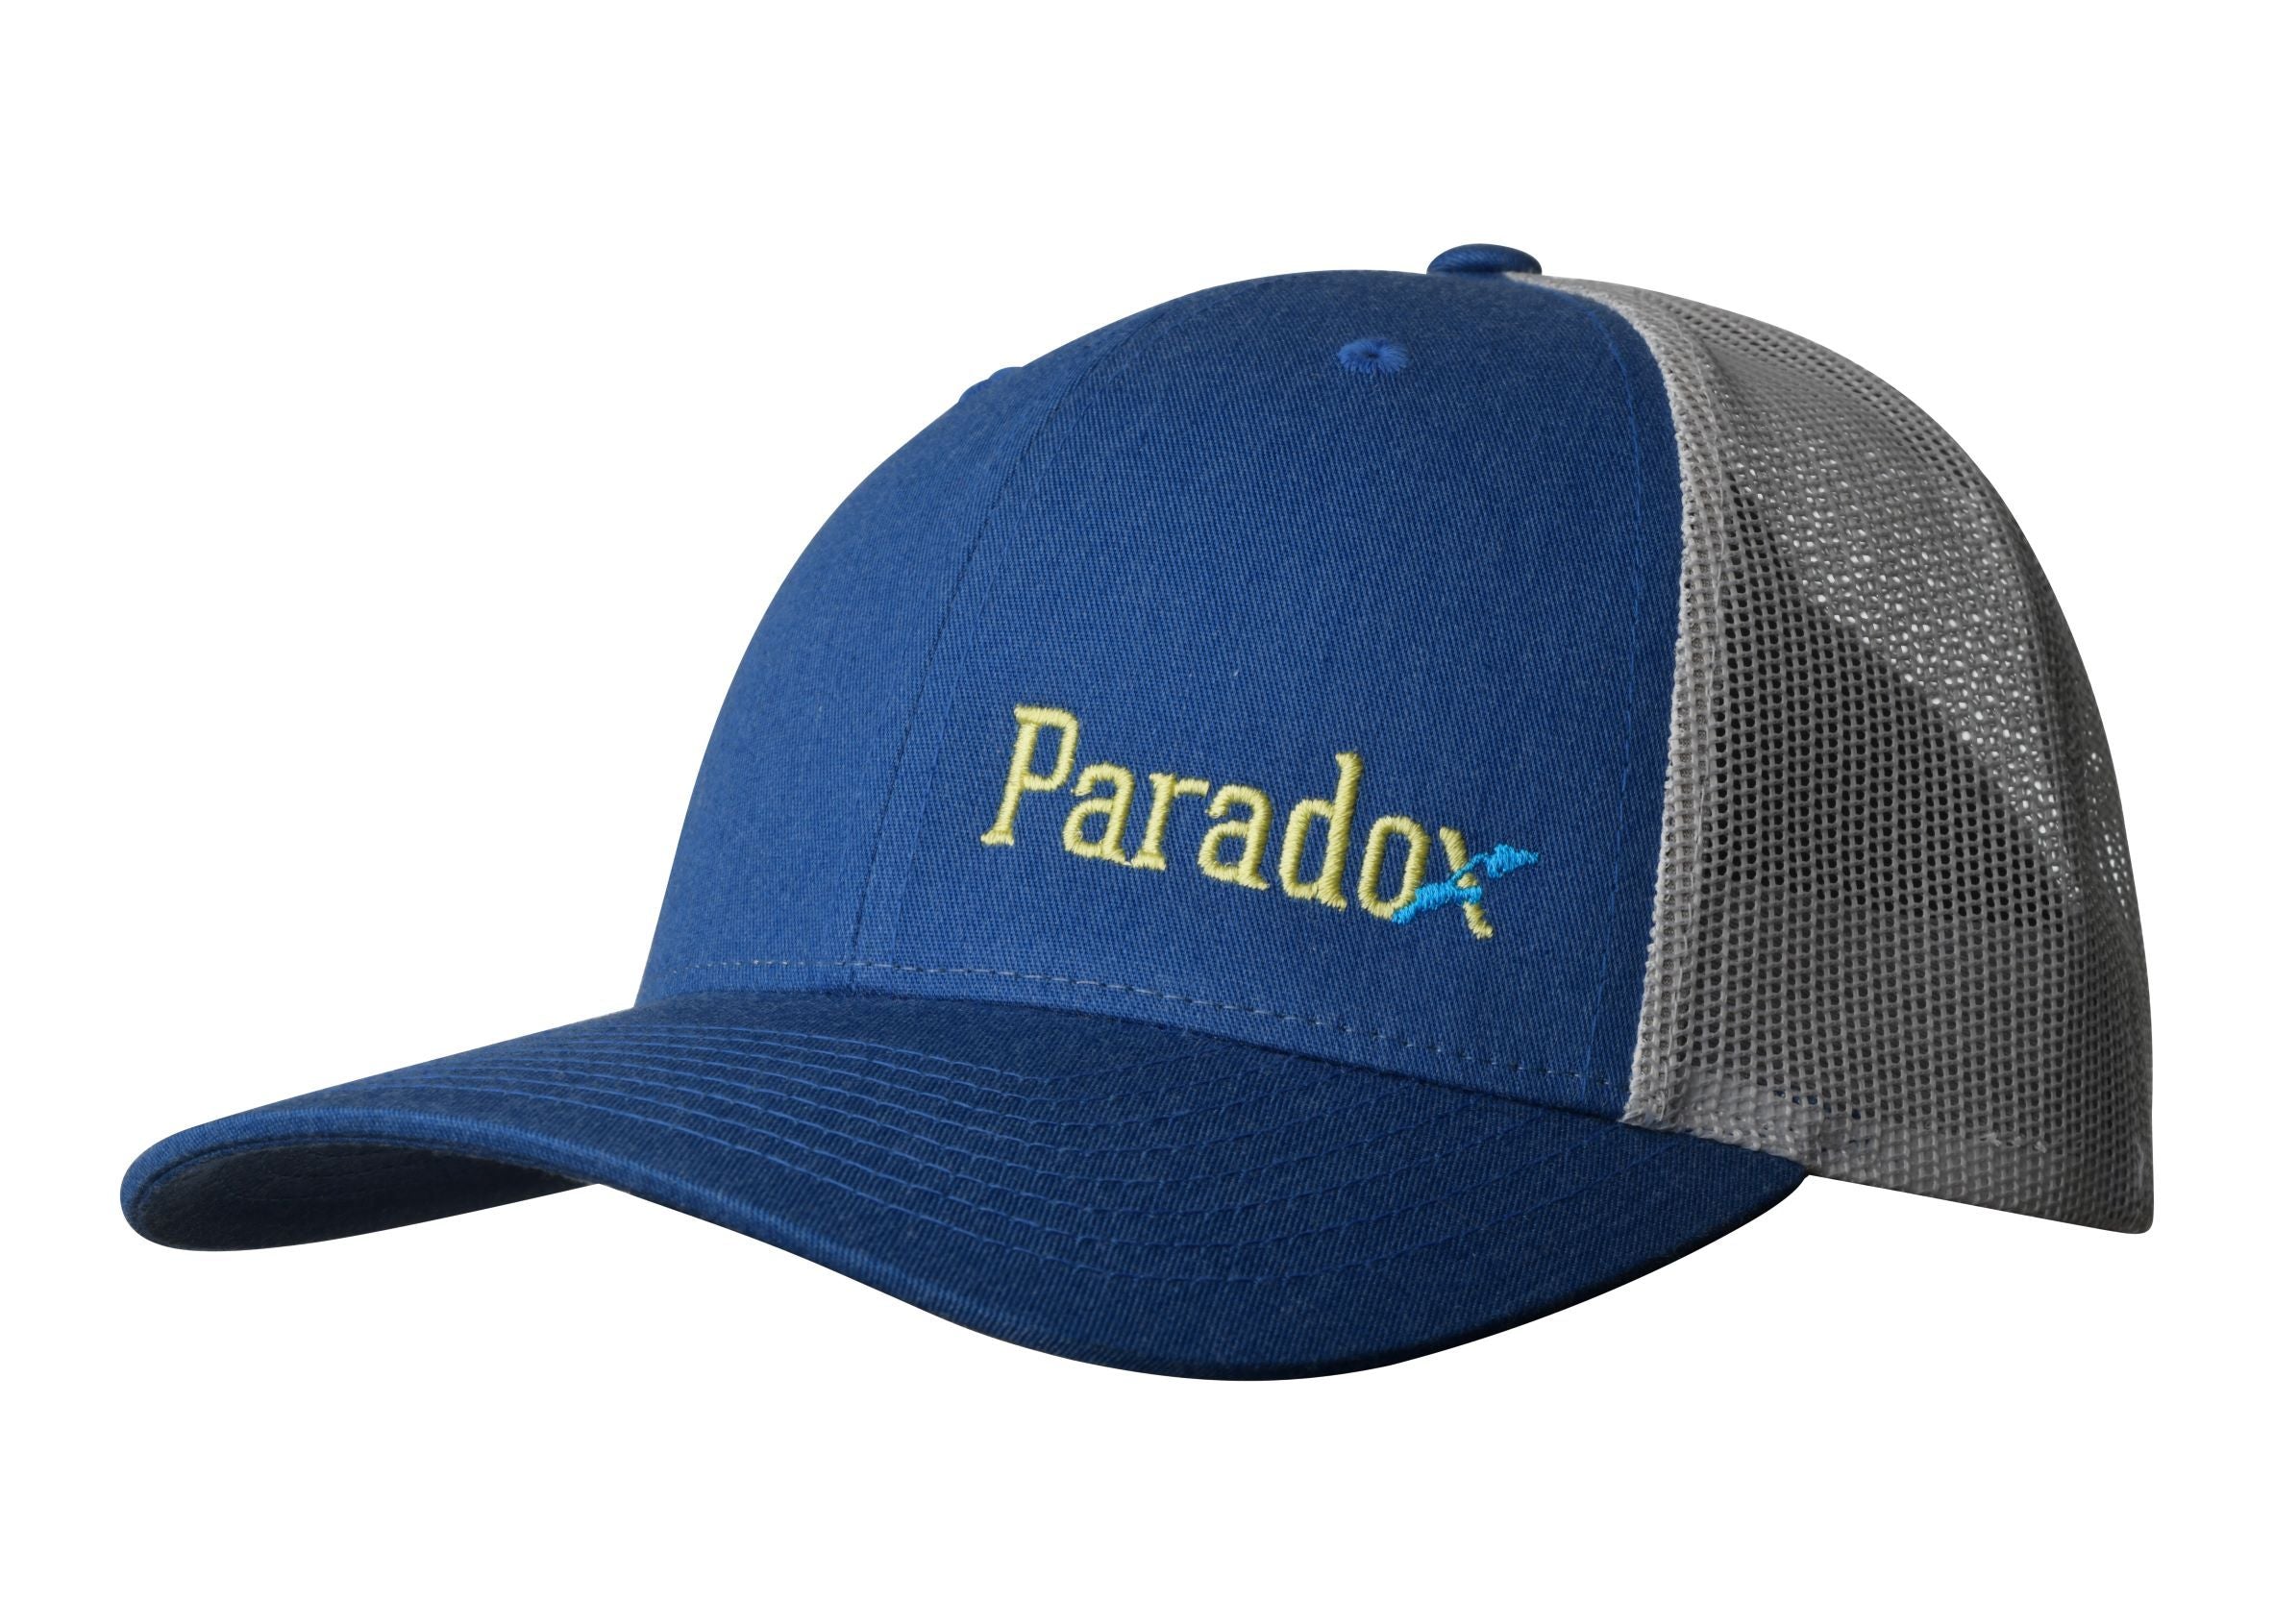 The Paradox Hat